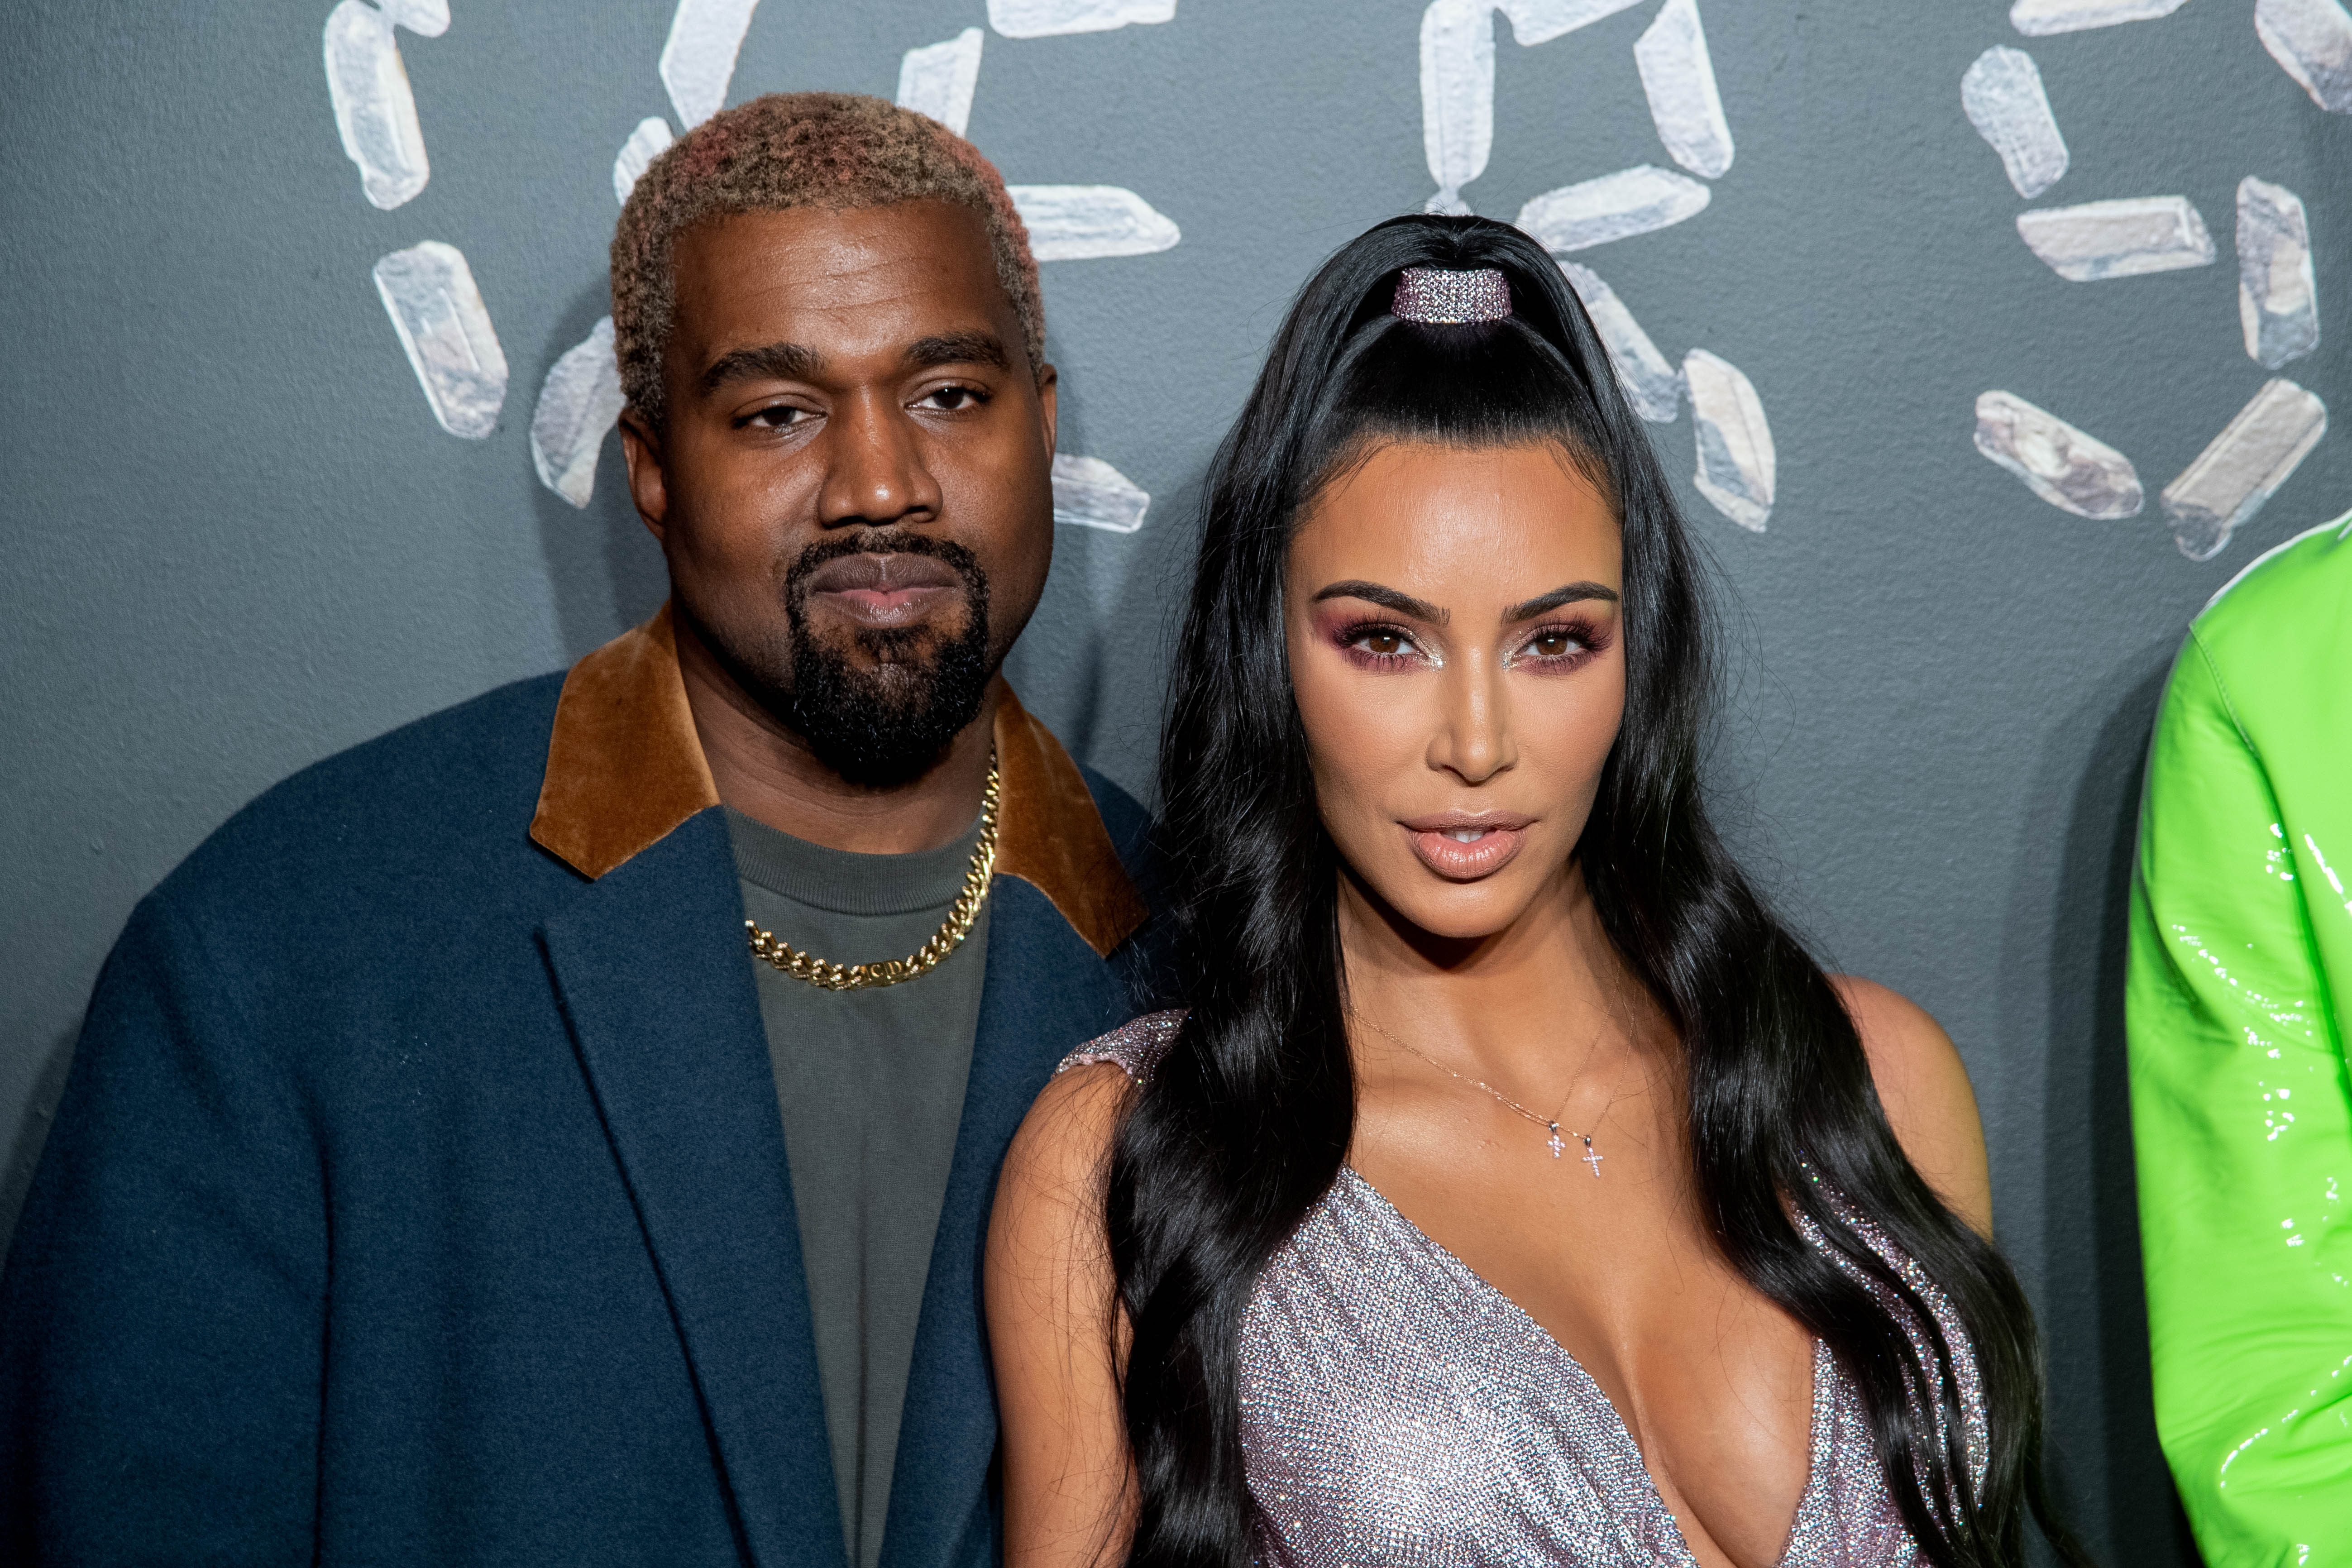 Kanye West and Kim Kardashian West at the the Versace fall 2019 fashion show held at the American Stock Exchange Building in lower Manhattan on December 02, 2018 in New York City | Photo: Getty Images